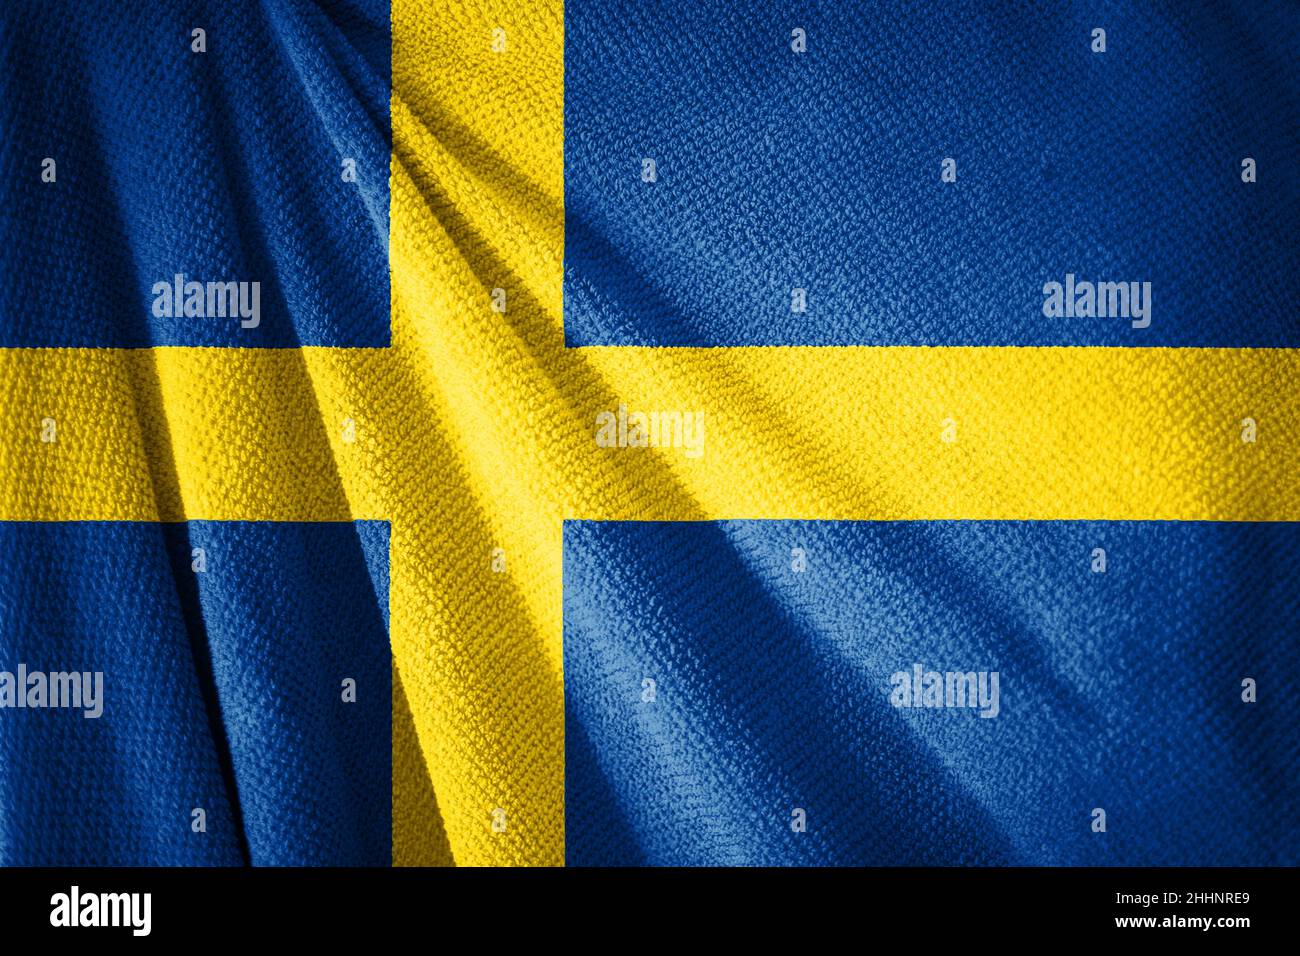 Swedish flag on towel surface illustration with, country symbol of Sweden Stock Photo